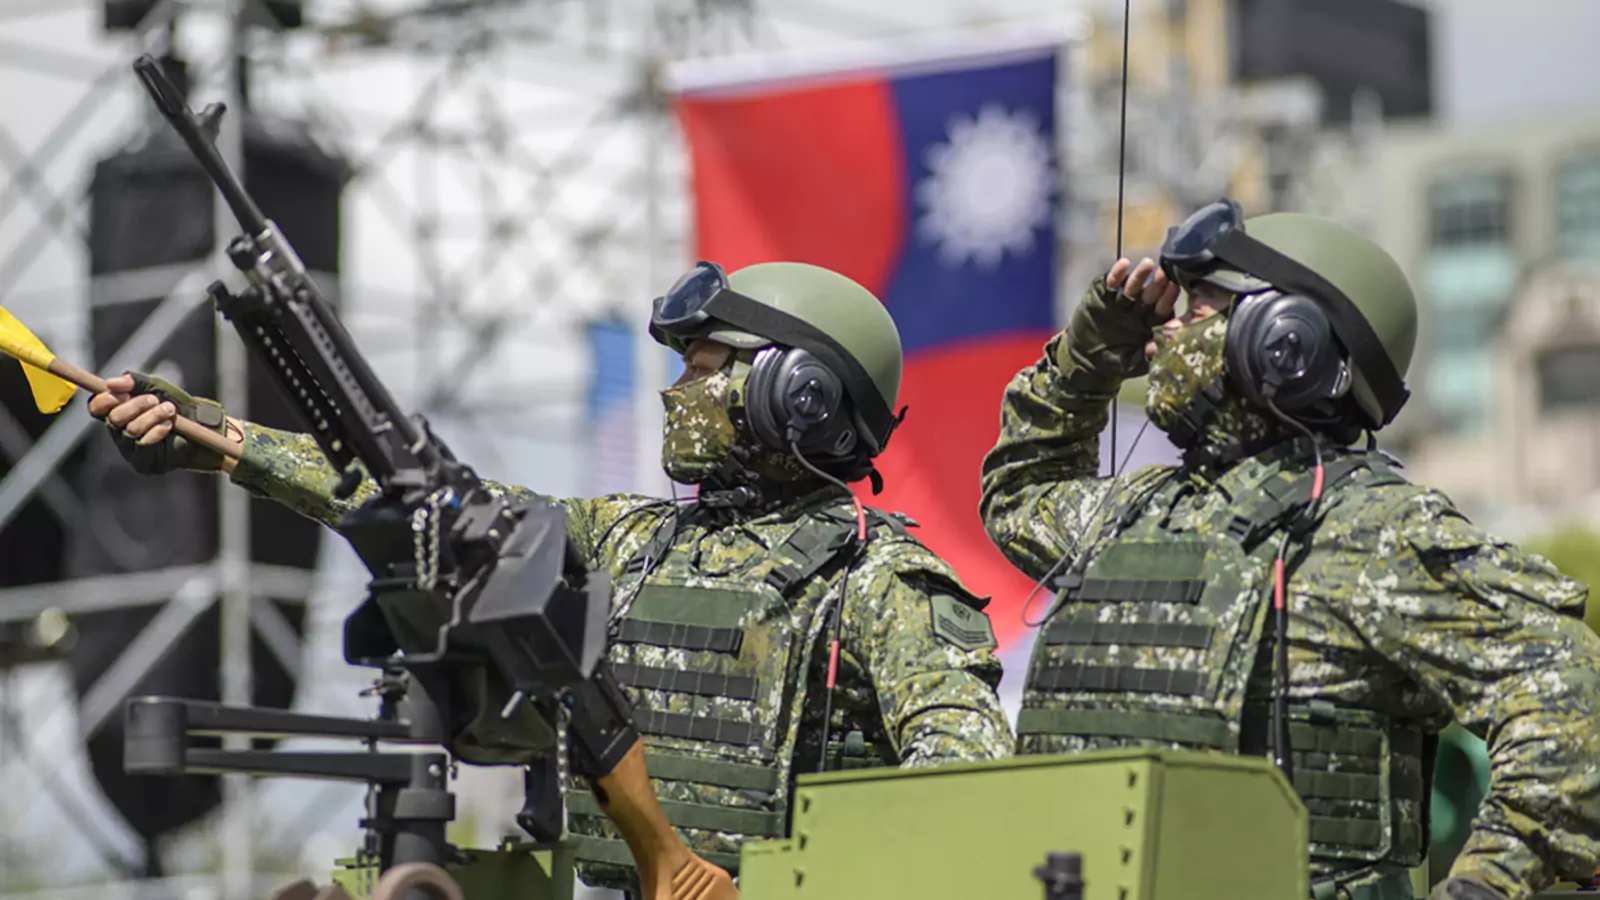 Does Taiwan Have the Right of Self-Defense? | Council on Foreign Relations